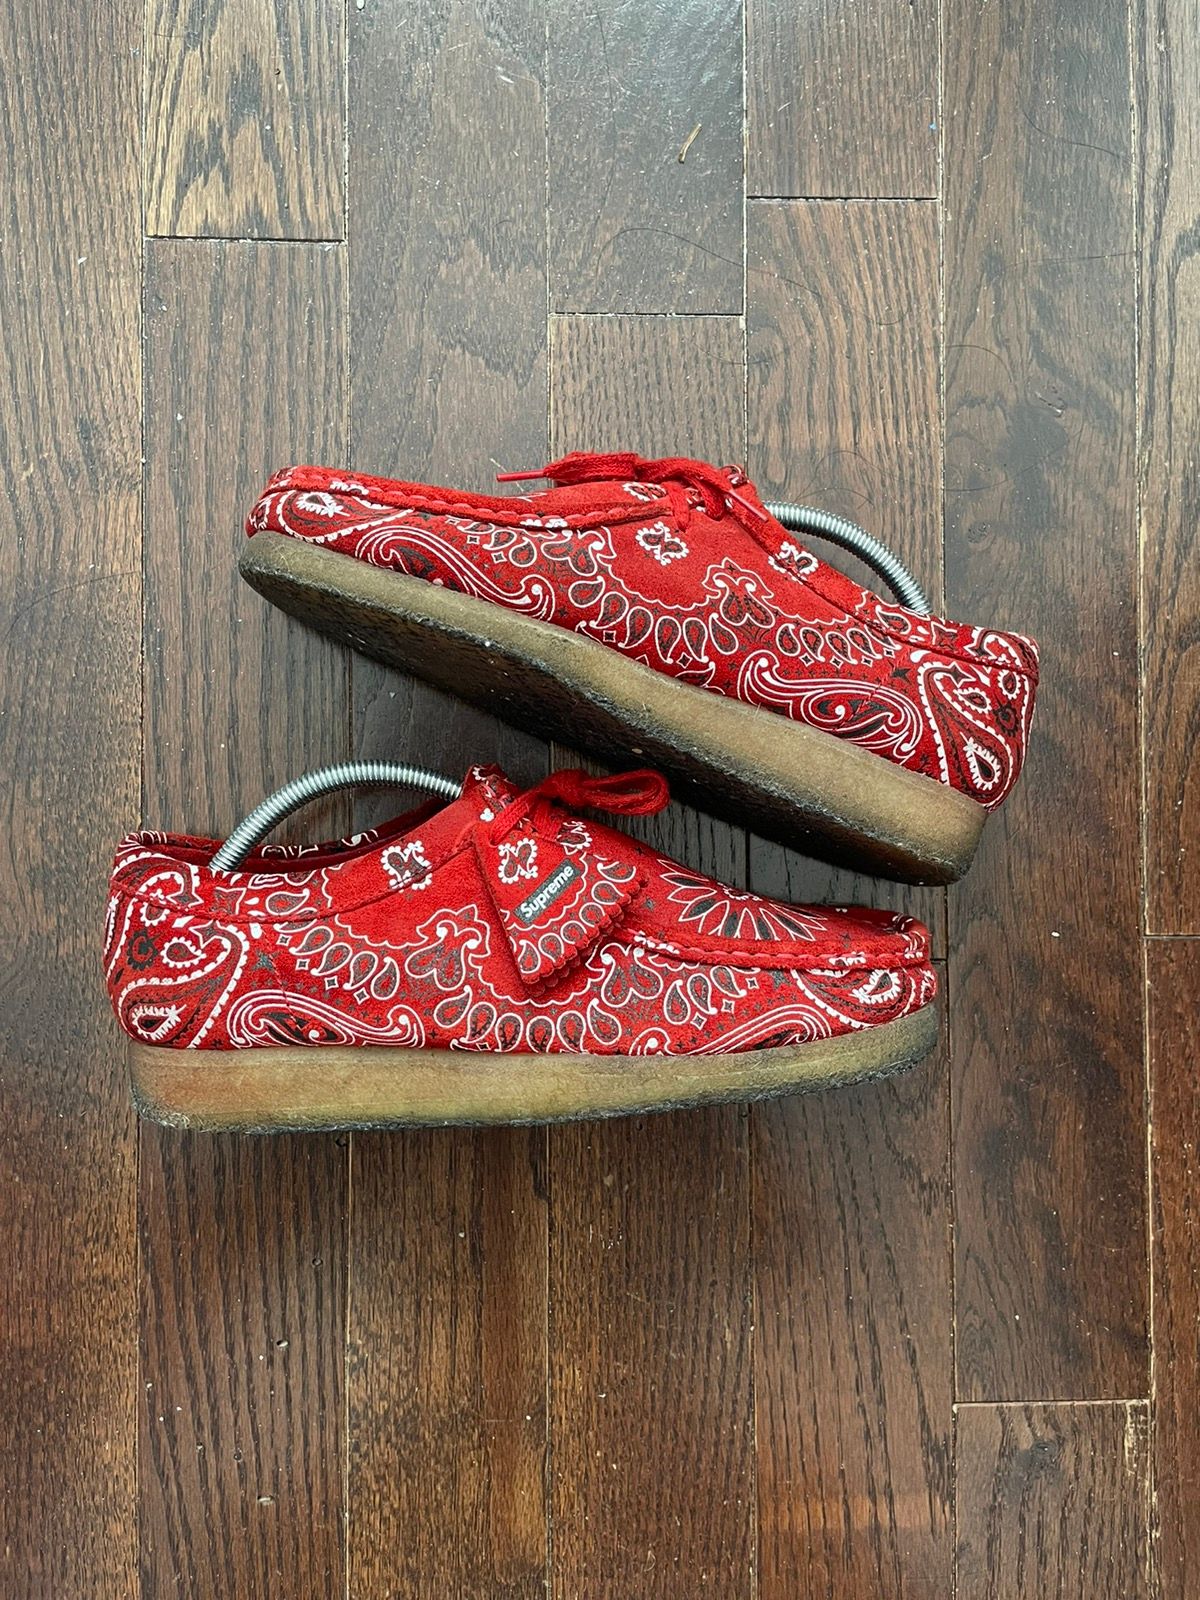 Supreme Supreme Clarks Wallabees Low Paisley Bandana Red | Grailed